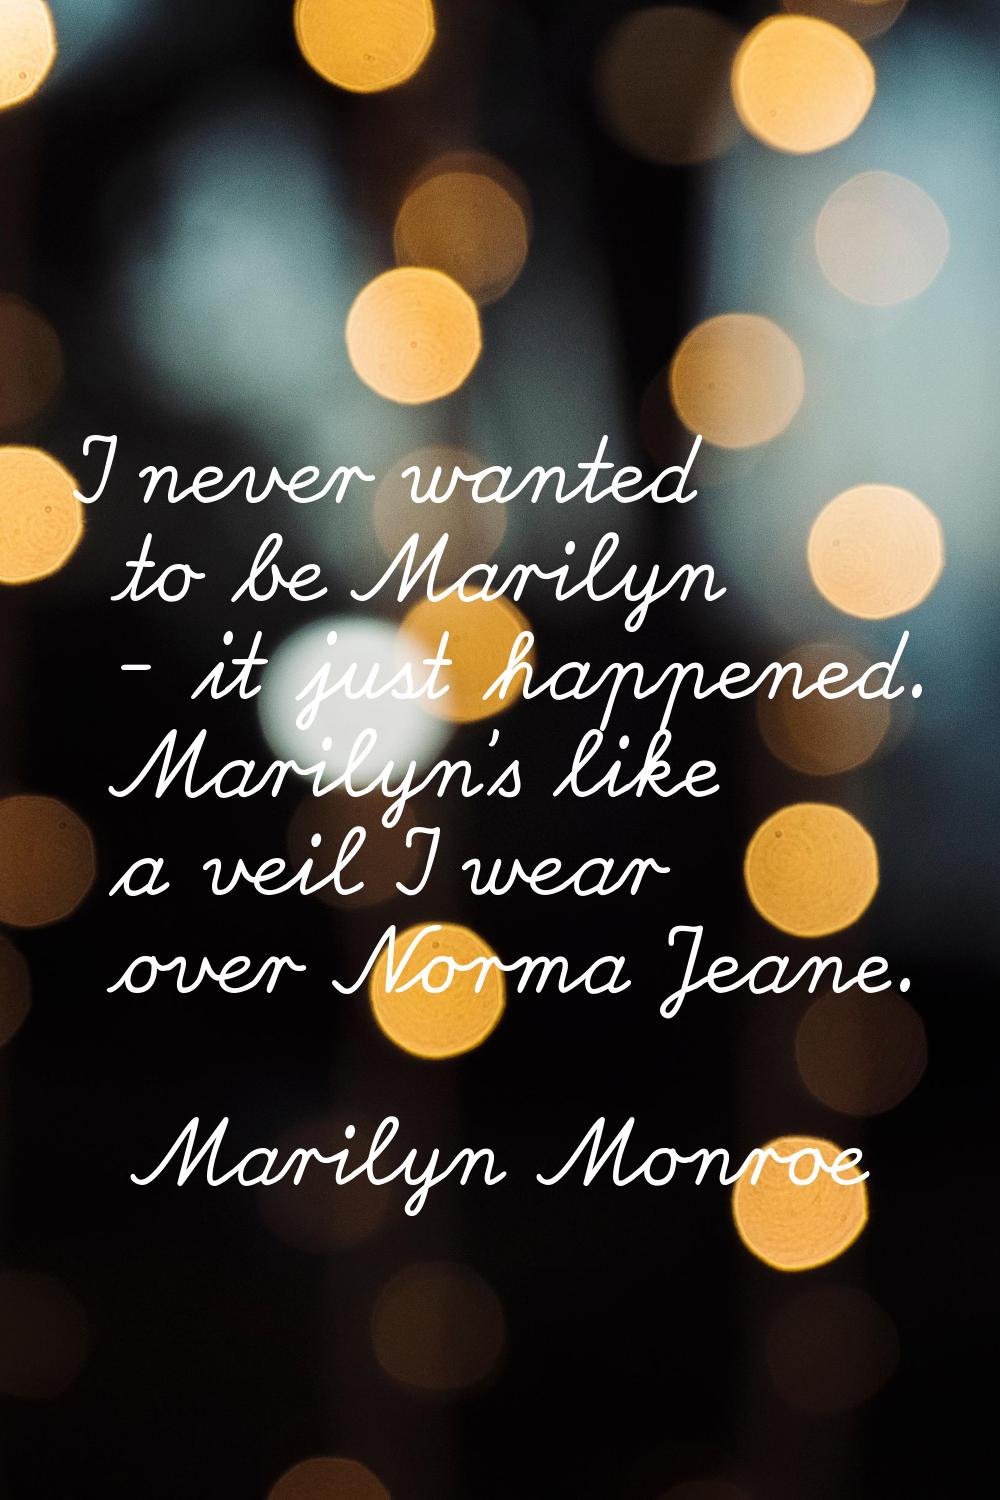 I never wanted to be Marilyn - it just happened. Marilyn's like a veil I wear over Norma Jeane.